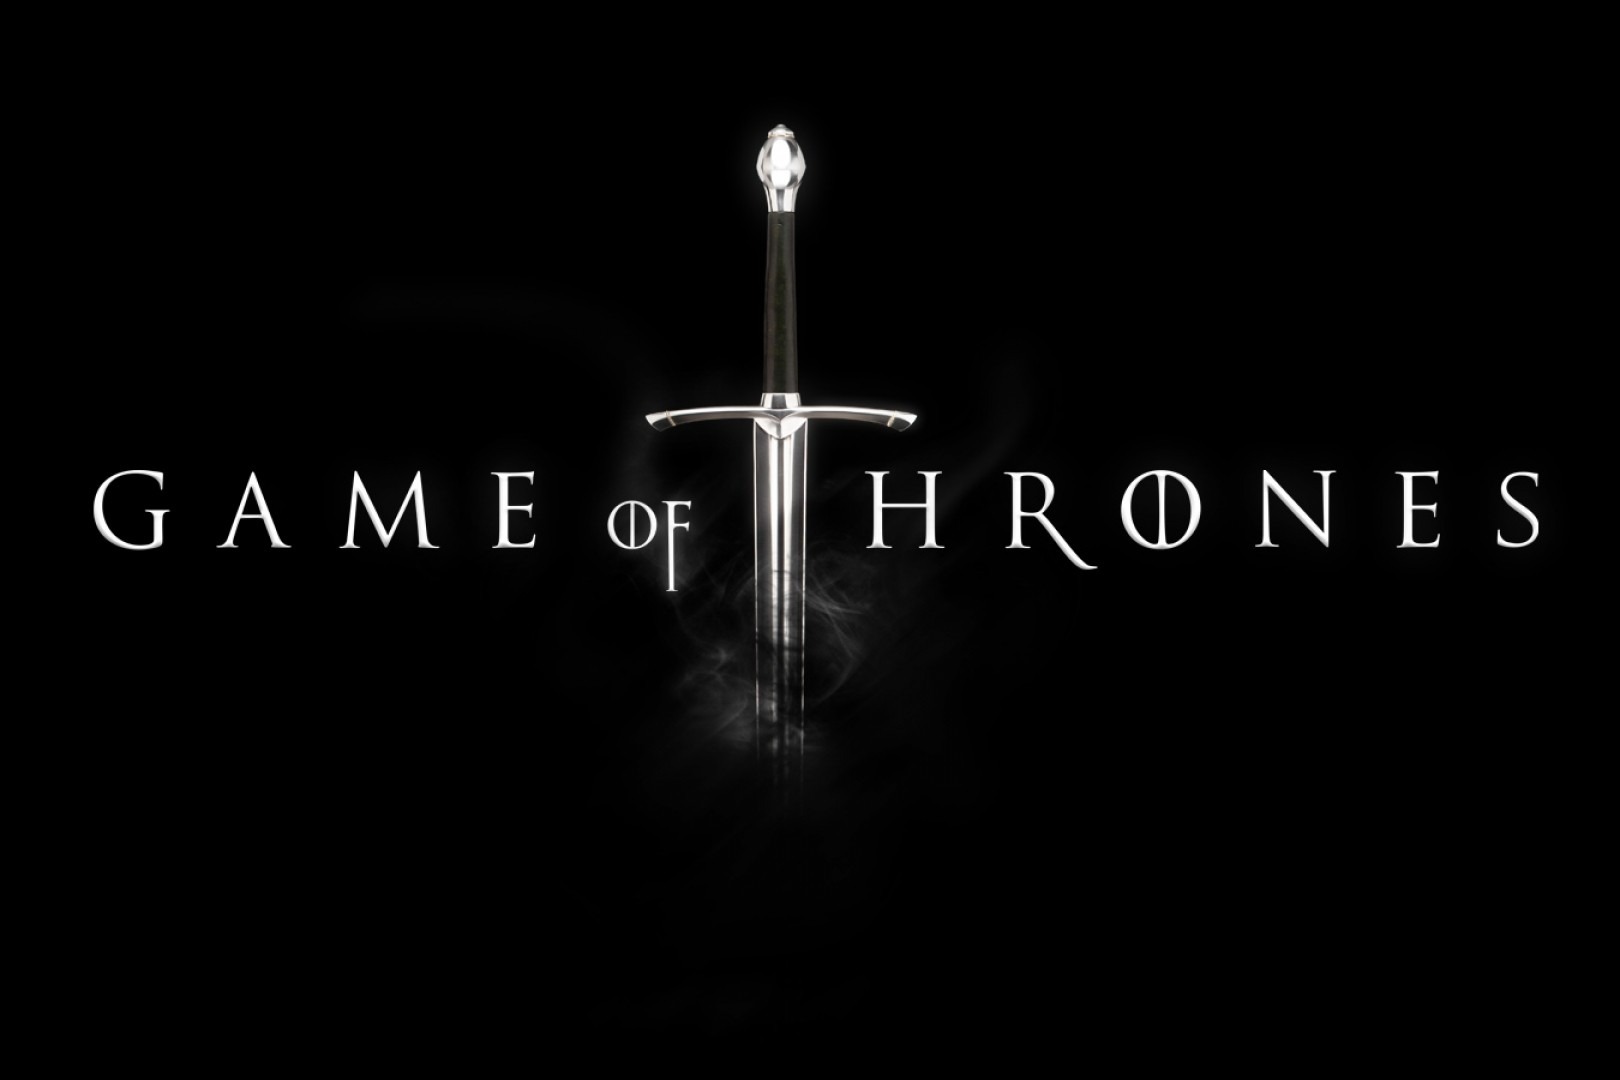 Game of thrones - Bande-Annonce ! 8